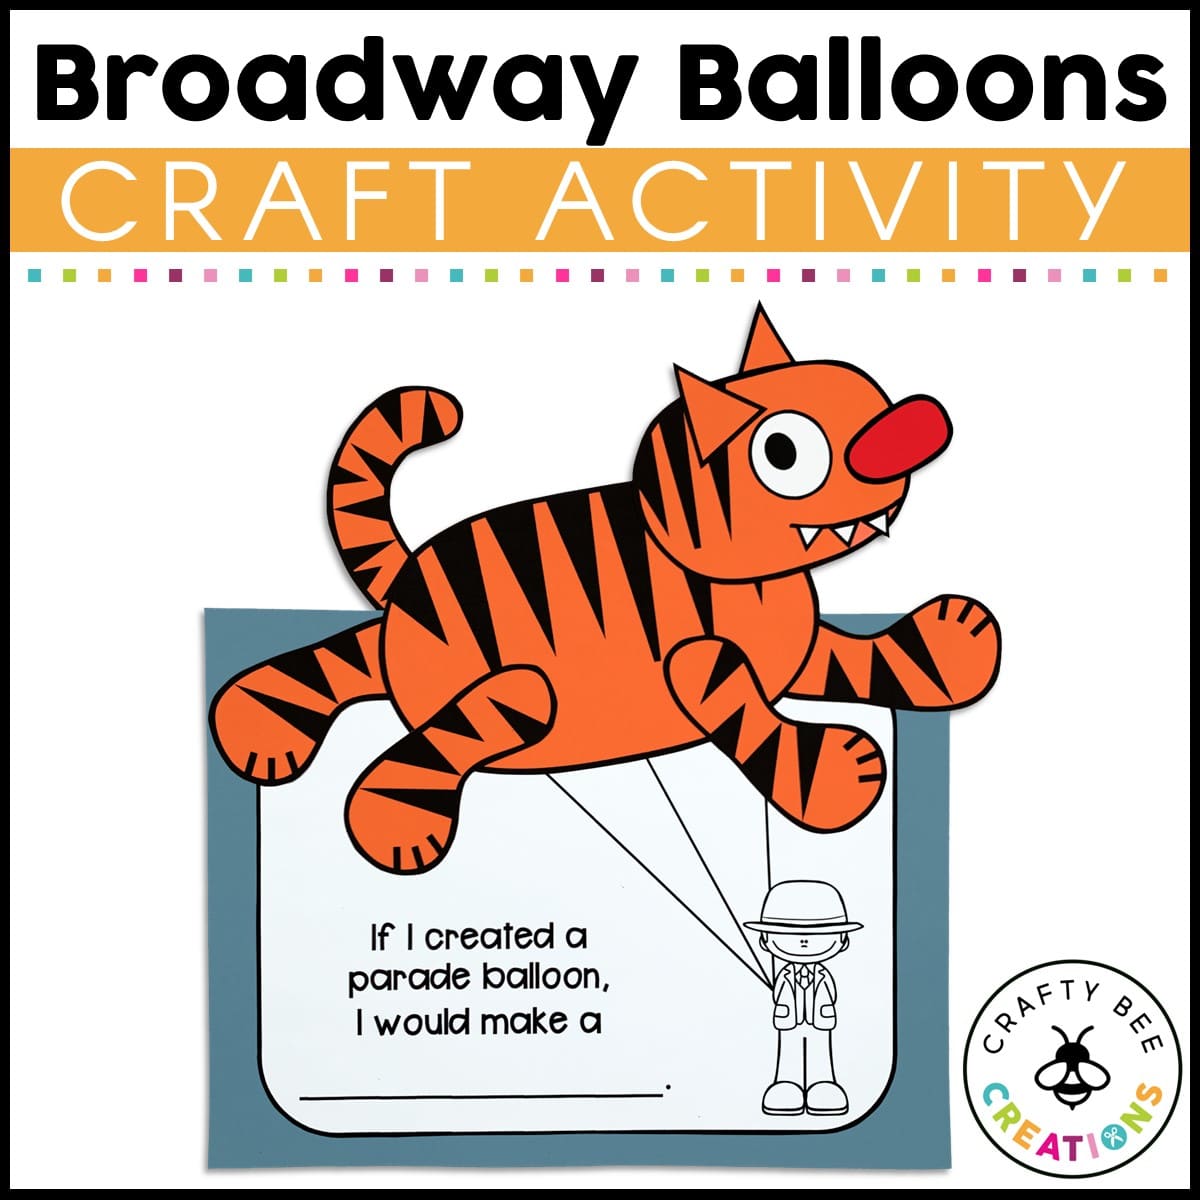 Broadway Balloons Craft Activity Crafty Bee Creations